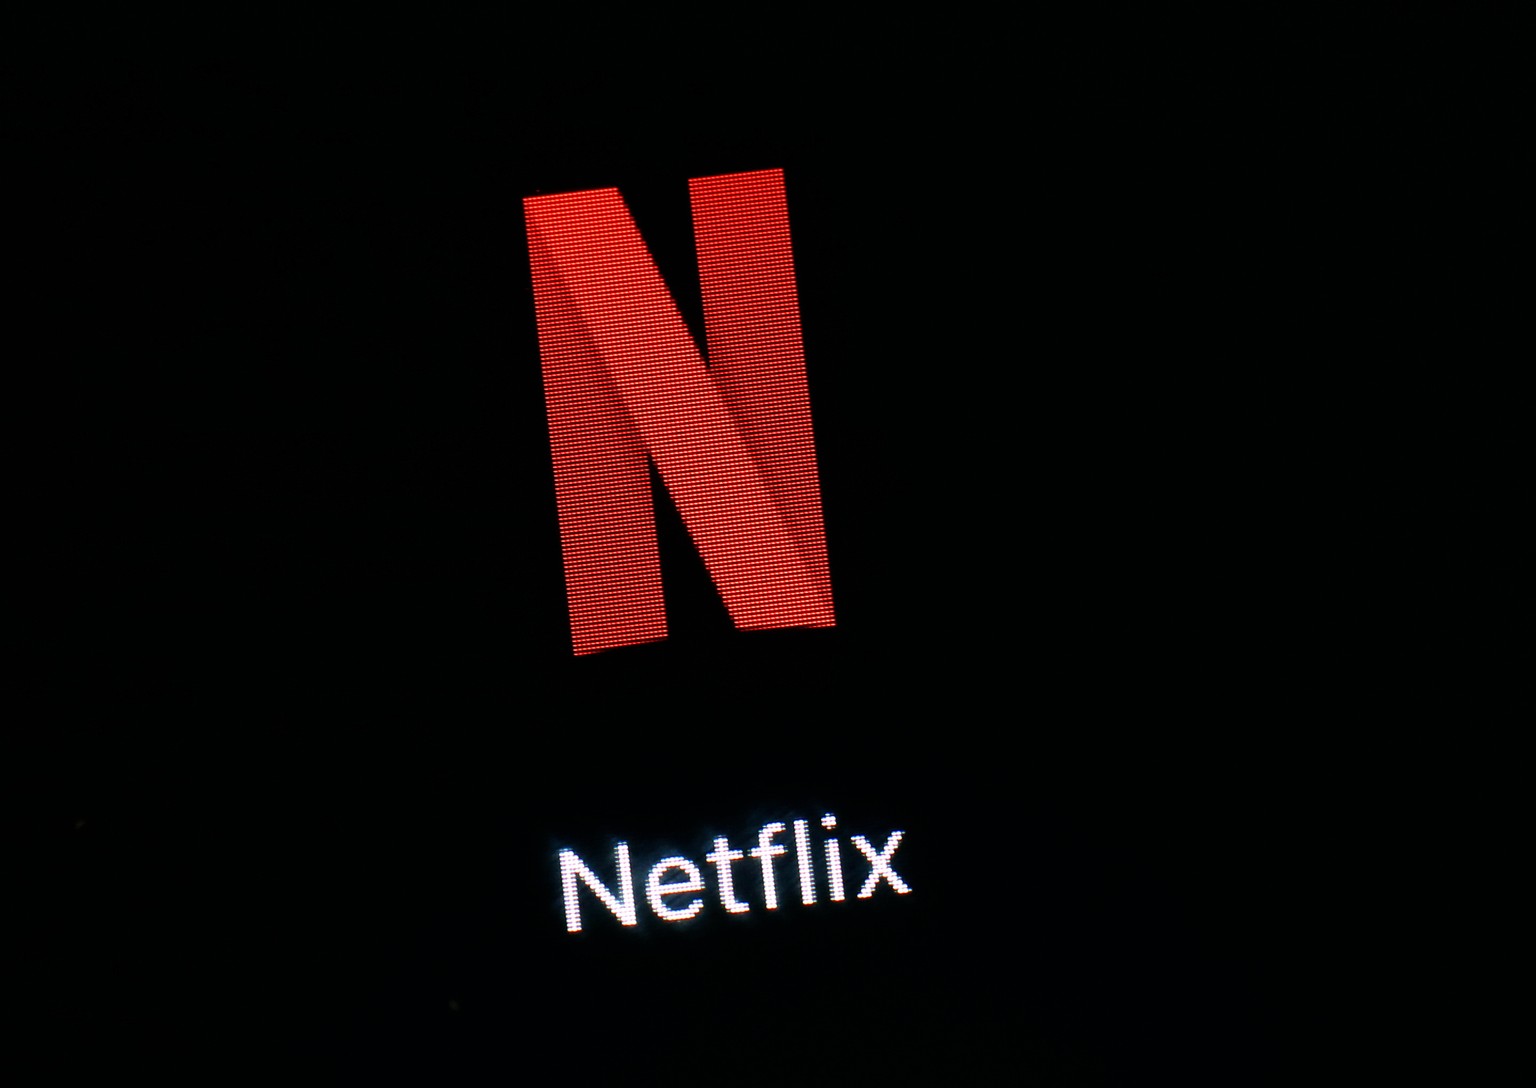 FILE- This March 19, 2018, file photo shows the Netflix app on an iPad in Baltimore. Netflix reports financial results Tuesday, April 16, 2019. (AP Photo/Patrick Semansky, File)